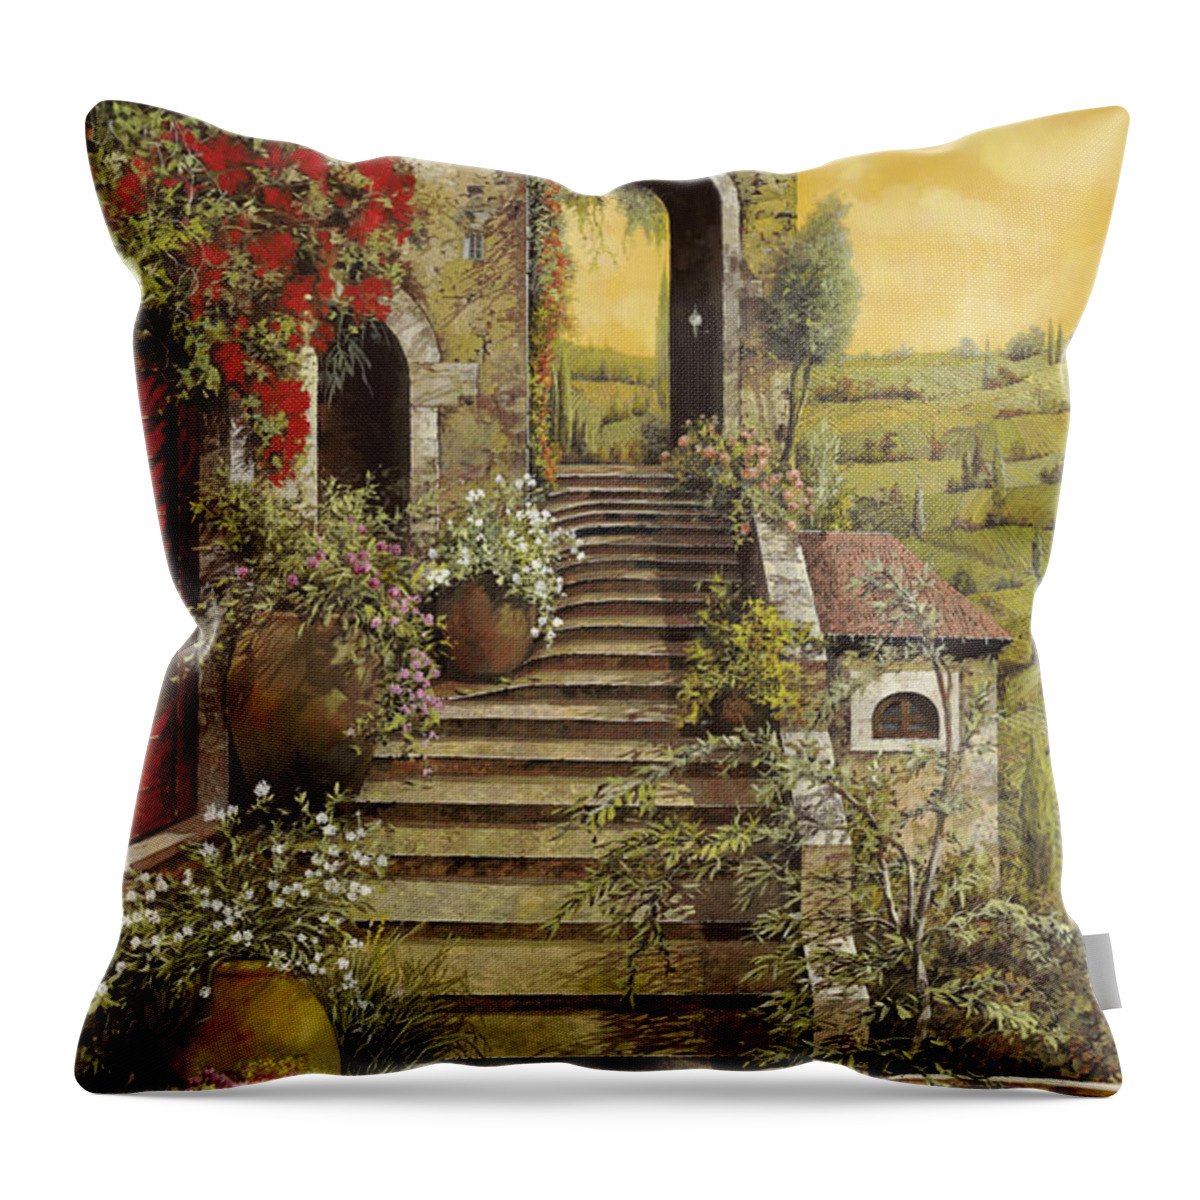 Arch Throw Pillow featuring the painting La Scala Grande by Guido Borelli